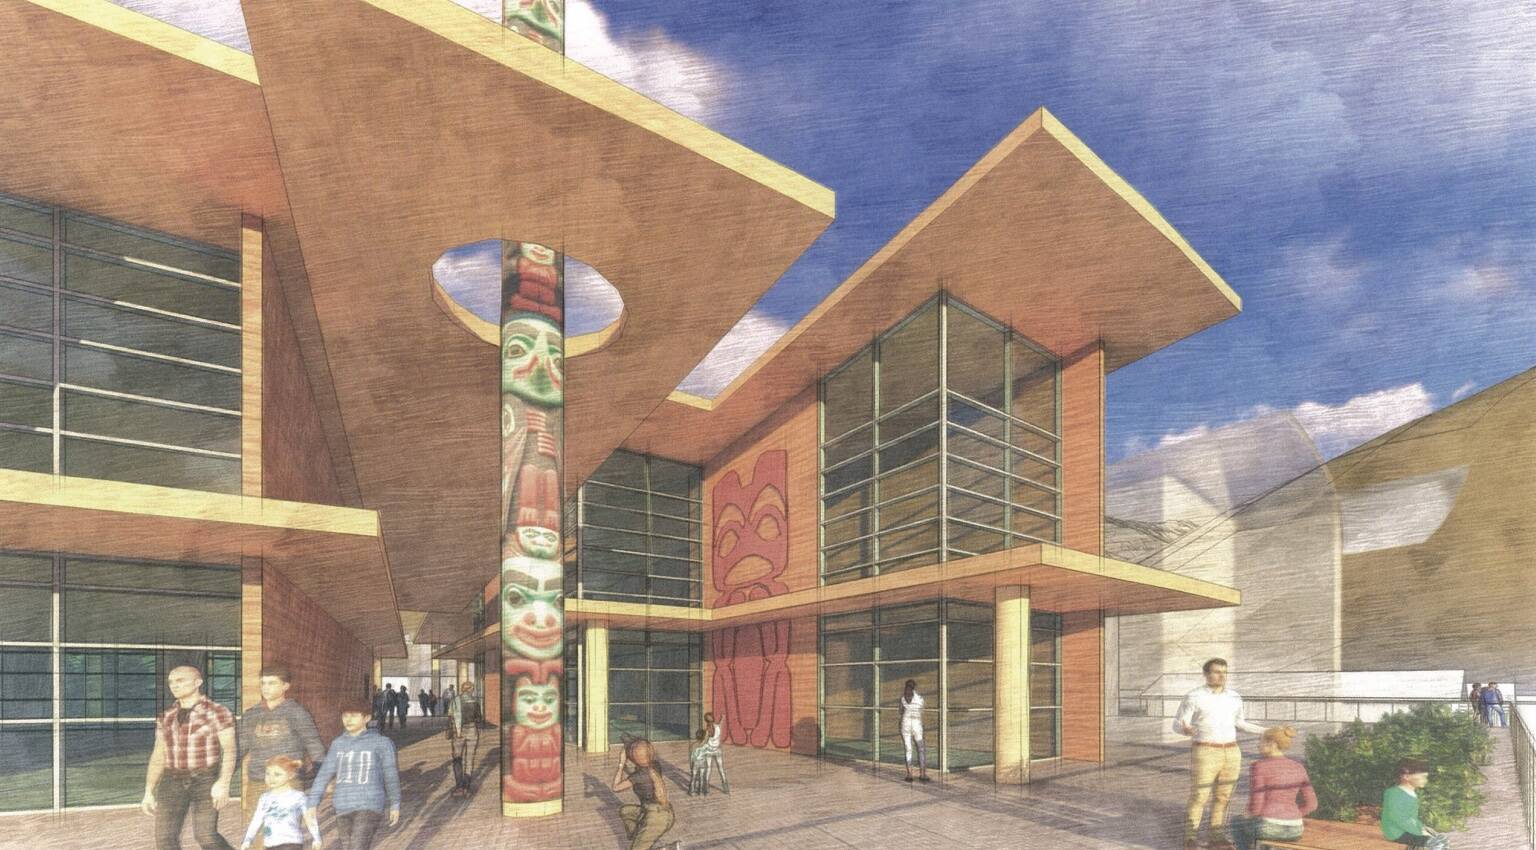 This rendering depicts Huna Totem Corp.’s proposed new downtown development project that was approved for a conditional permit by the City and Borough of Juneau Planning Commission Tuesday night. (City and Borough of Juneau)